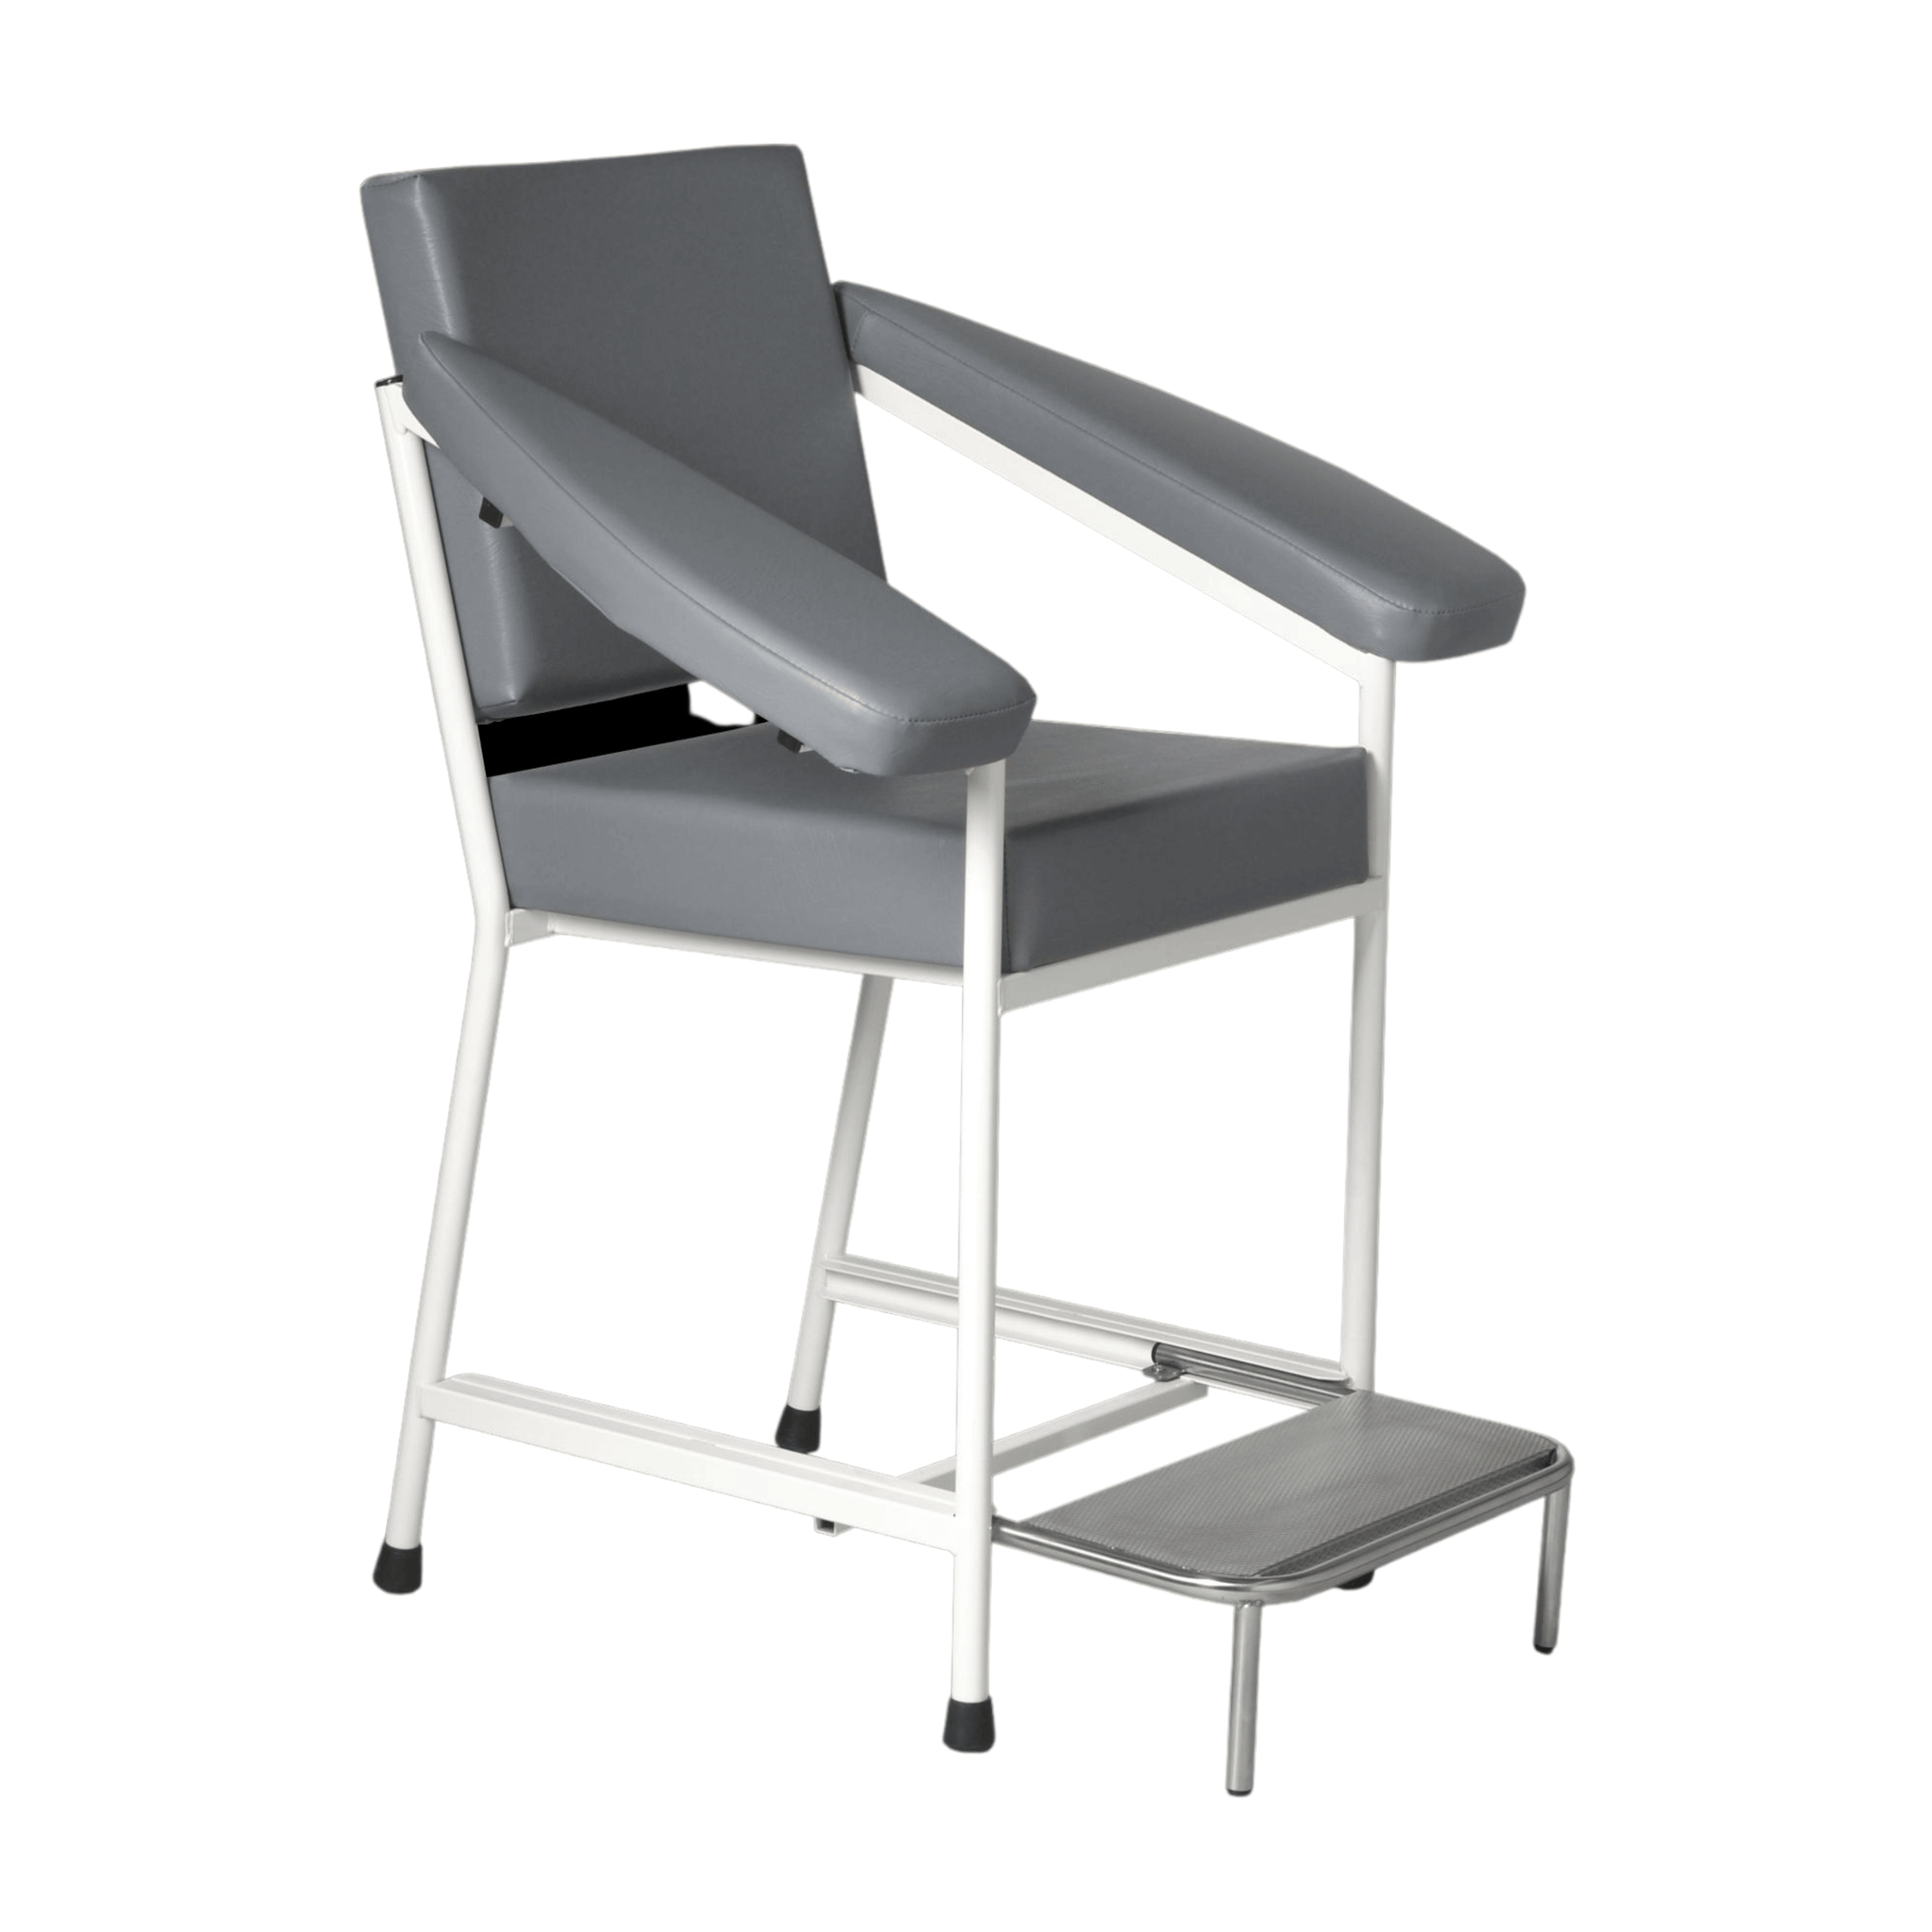 Blood Collection Chair - Sliding Foot Rest, Grey